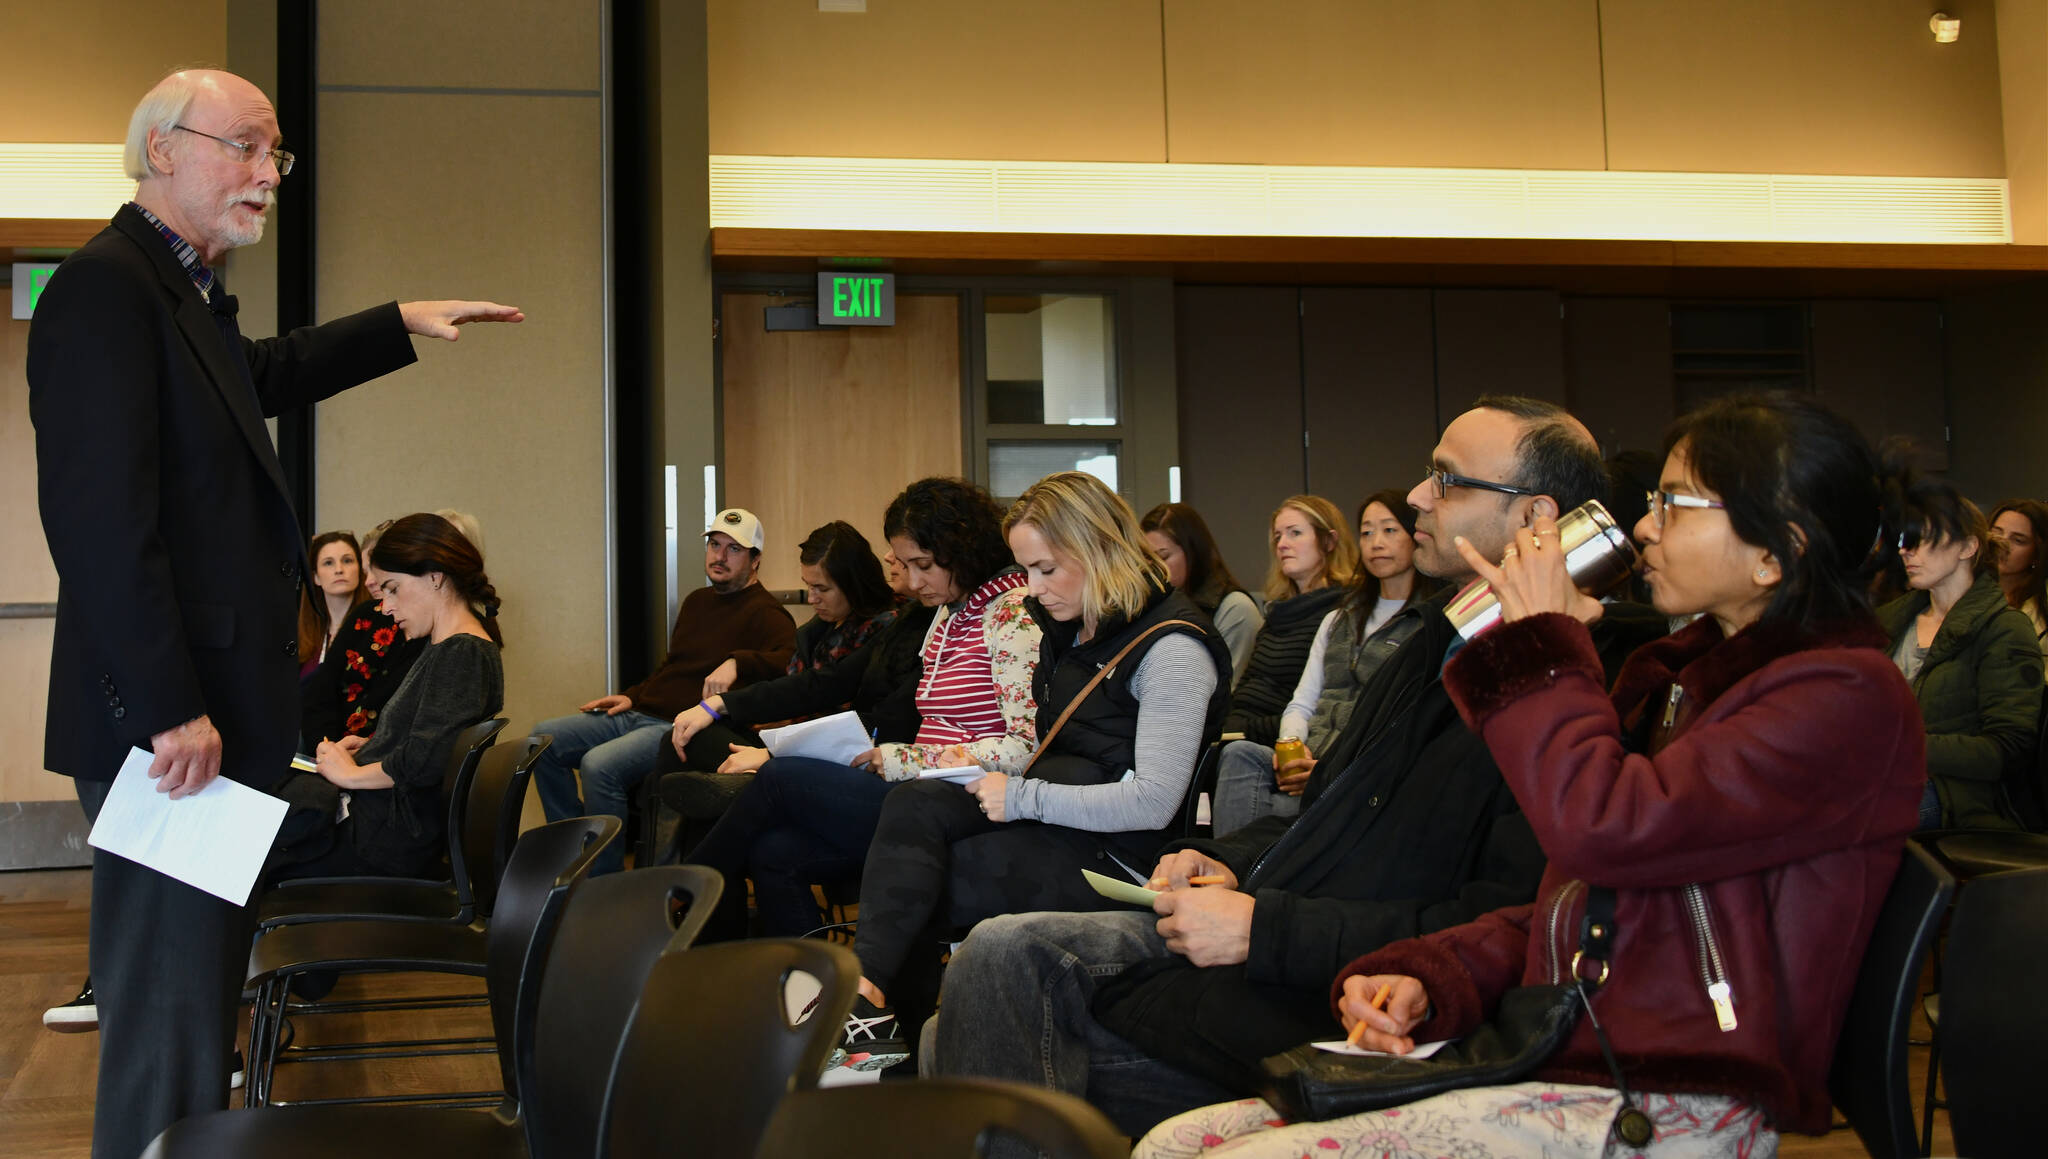 William Stixrud, PhD, speaks to parents about “Raising a Self-Driven Child” on March 8 at the Mercer Island Community and Event Center. Andy Nystrom/ staff photo